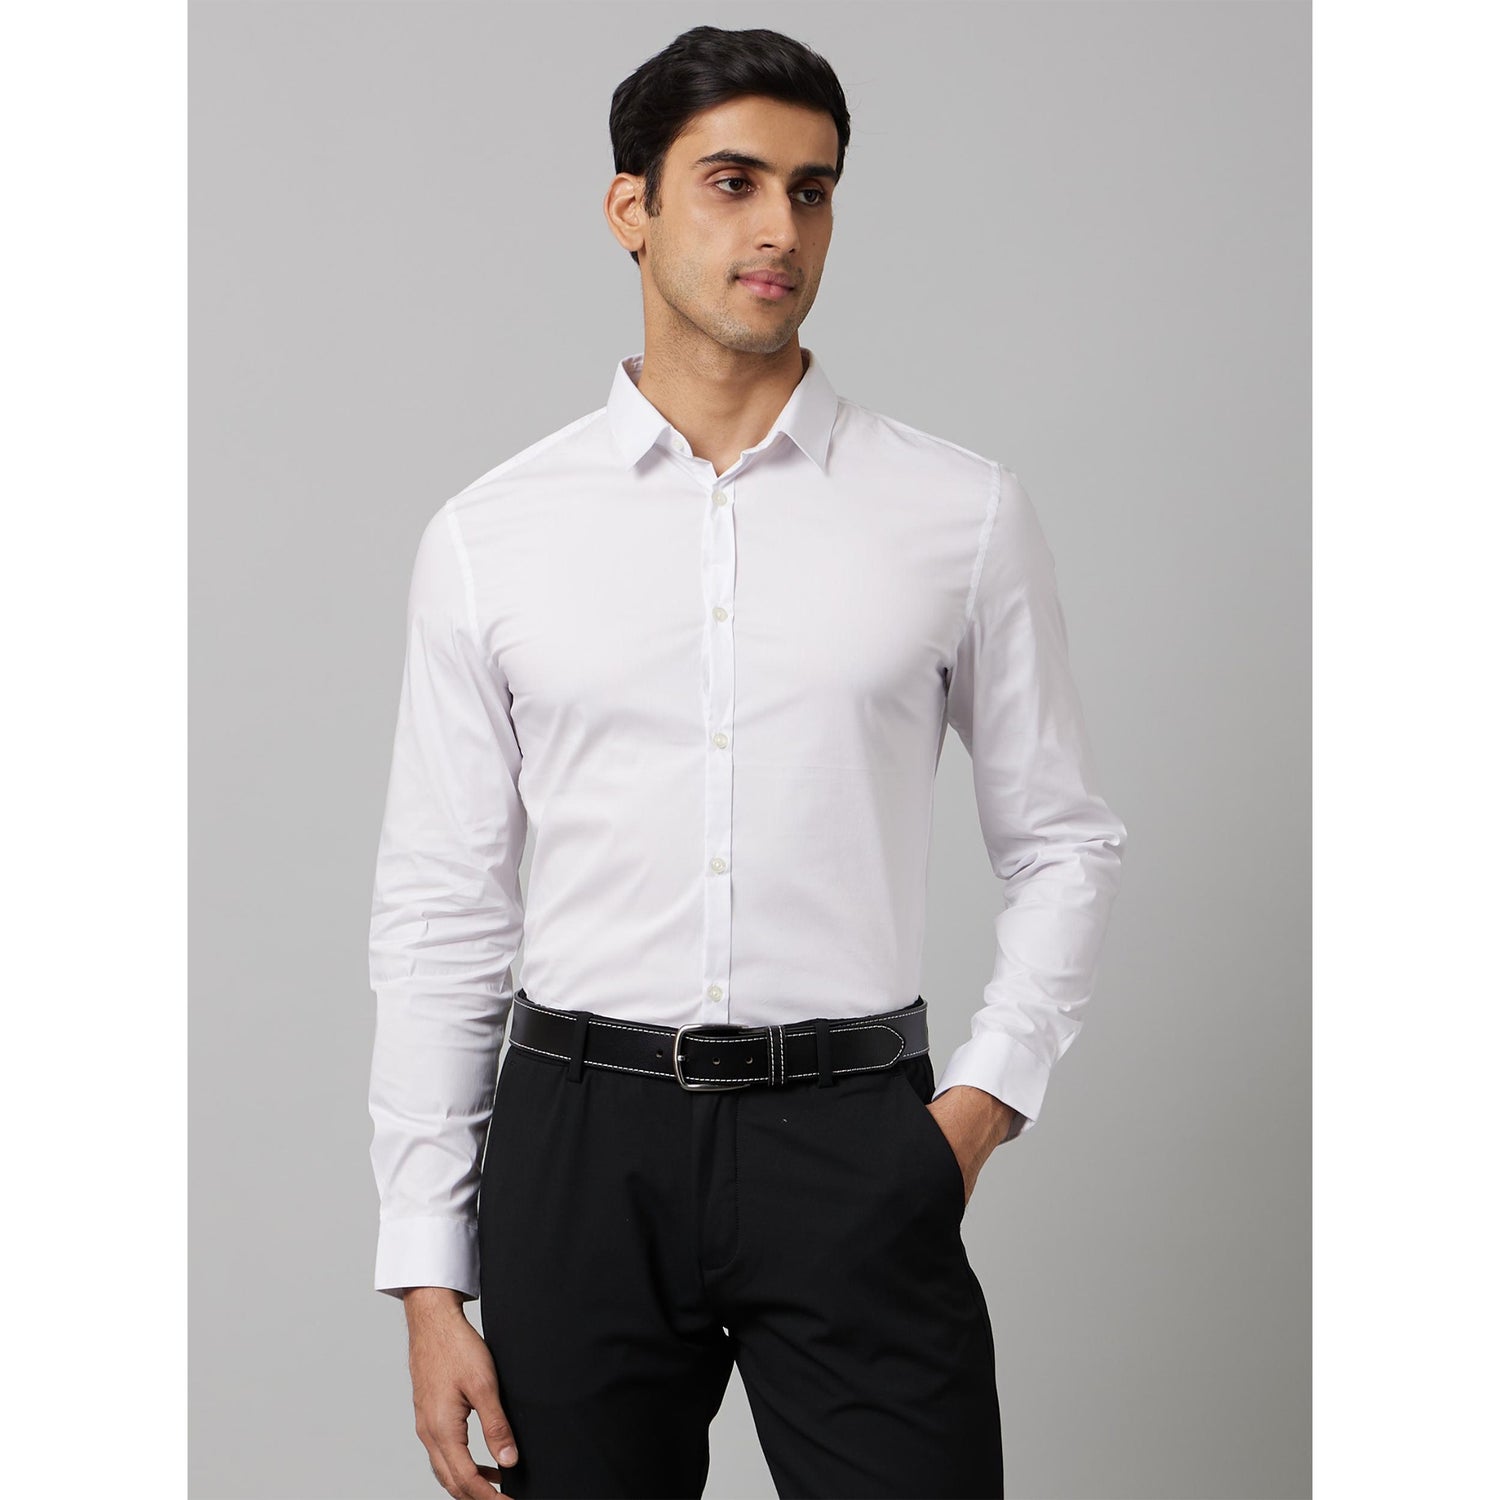 Formal Solid White Long Sleeves Shirt